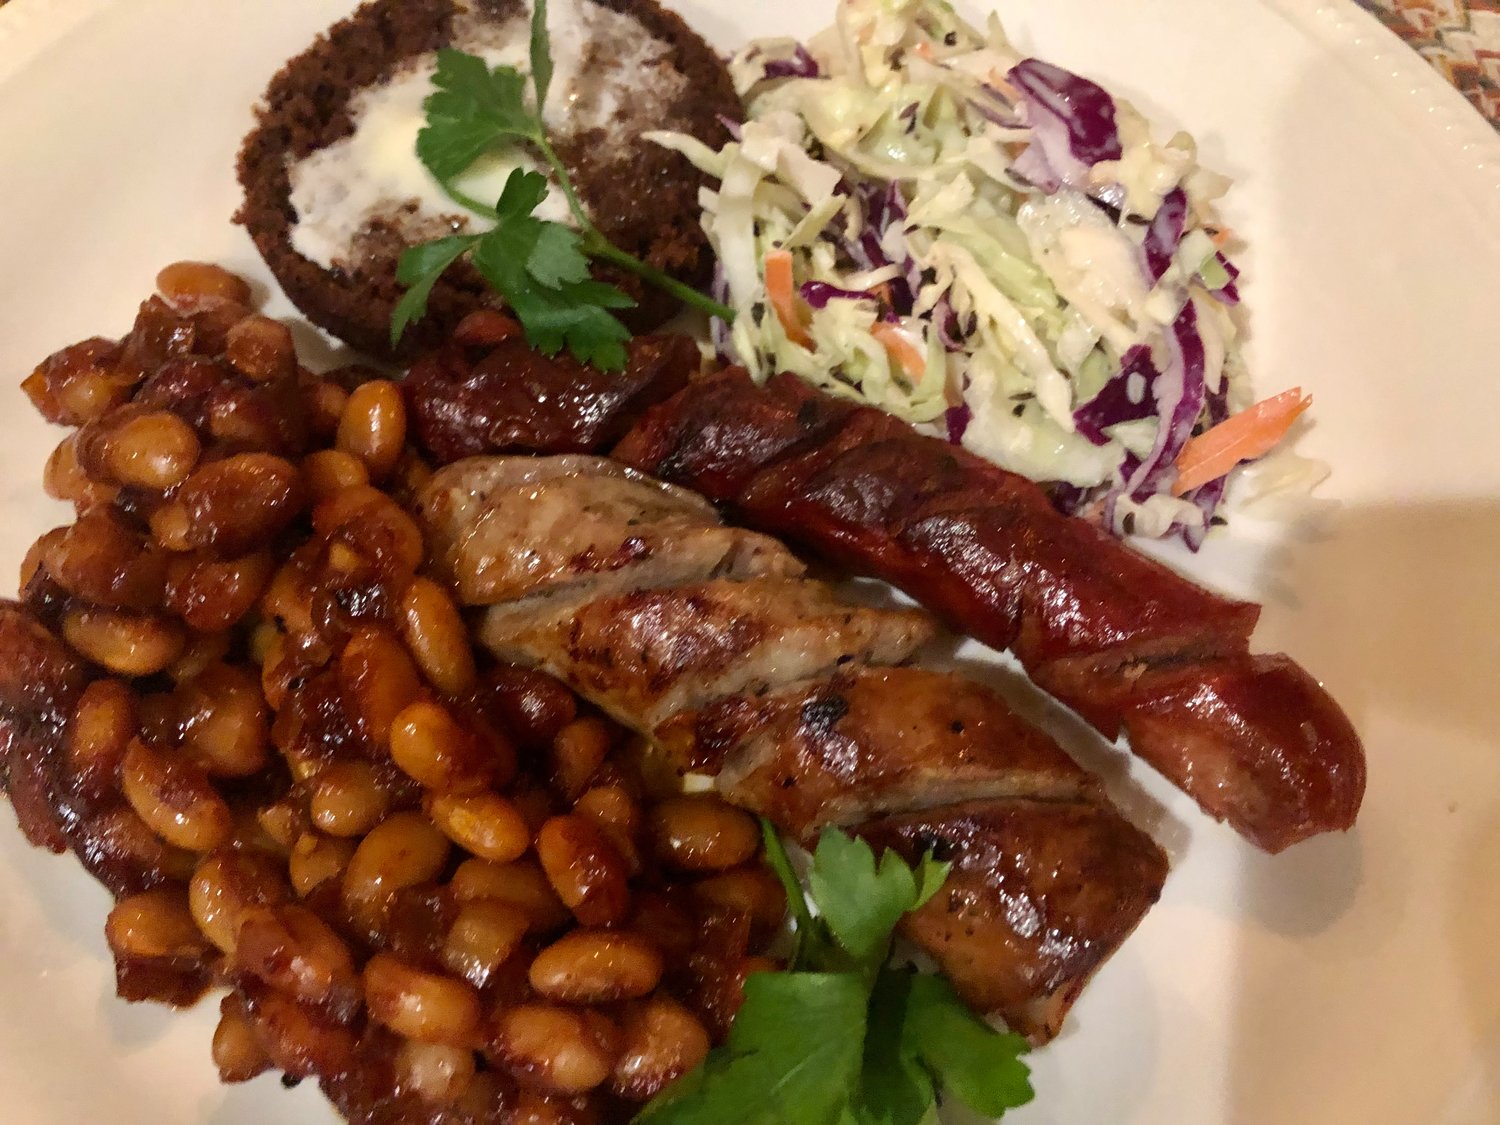 There’s no better way to take the chill off a cold winter day than with a plate of bourbon baked beans with grilled and spiralized sausages and hot dogs, with a side of cole slaw.